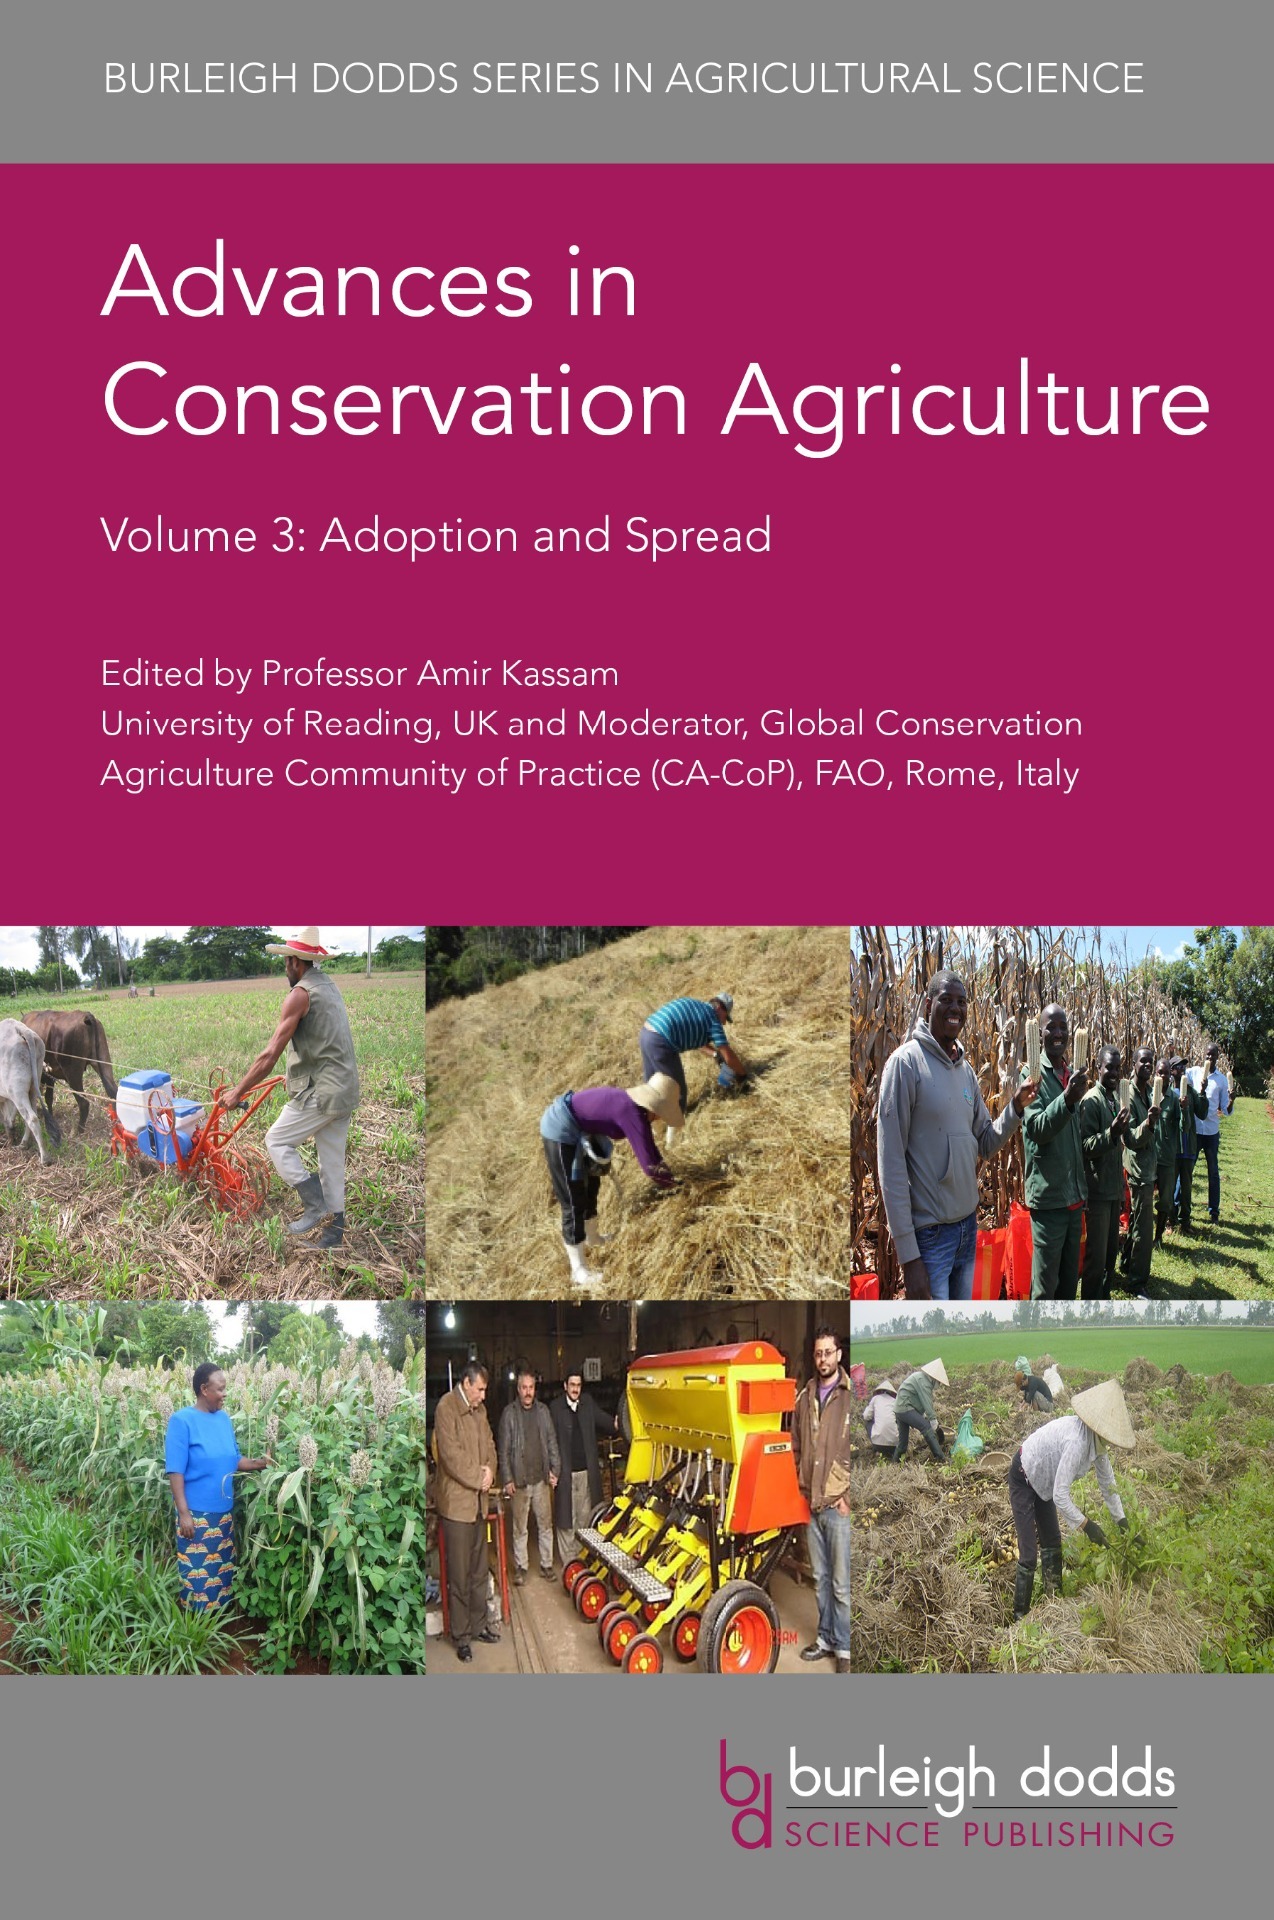 Advances in Conservation Agriculture - Volume 3: Adoption and Spread